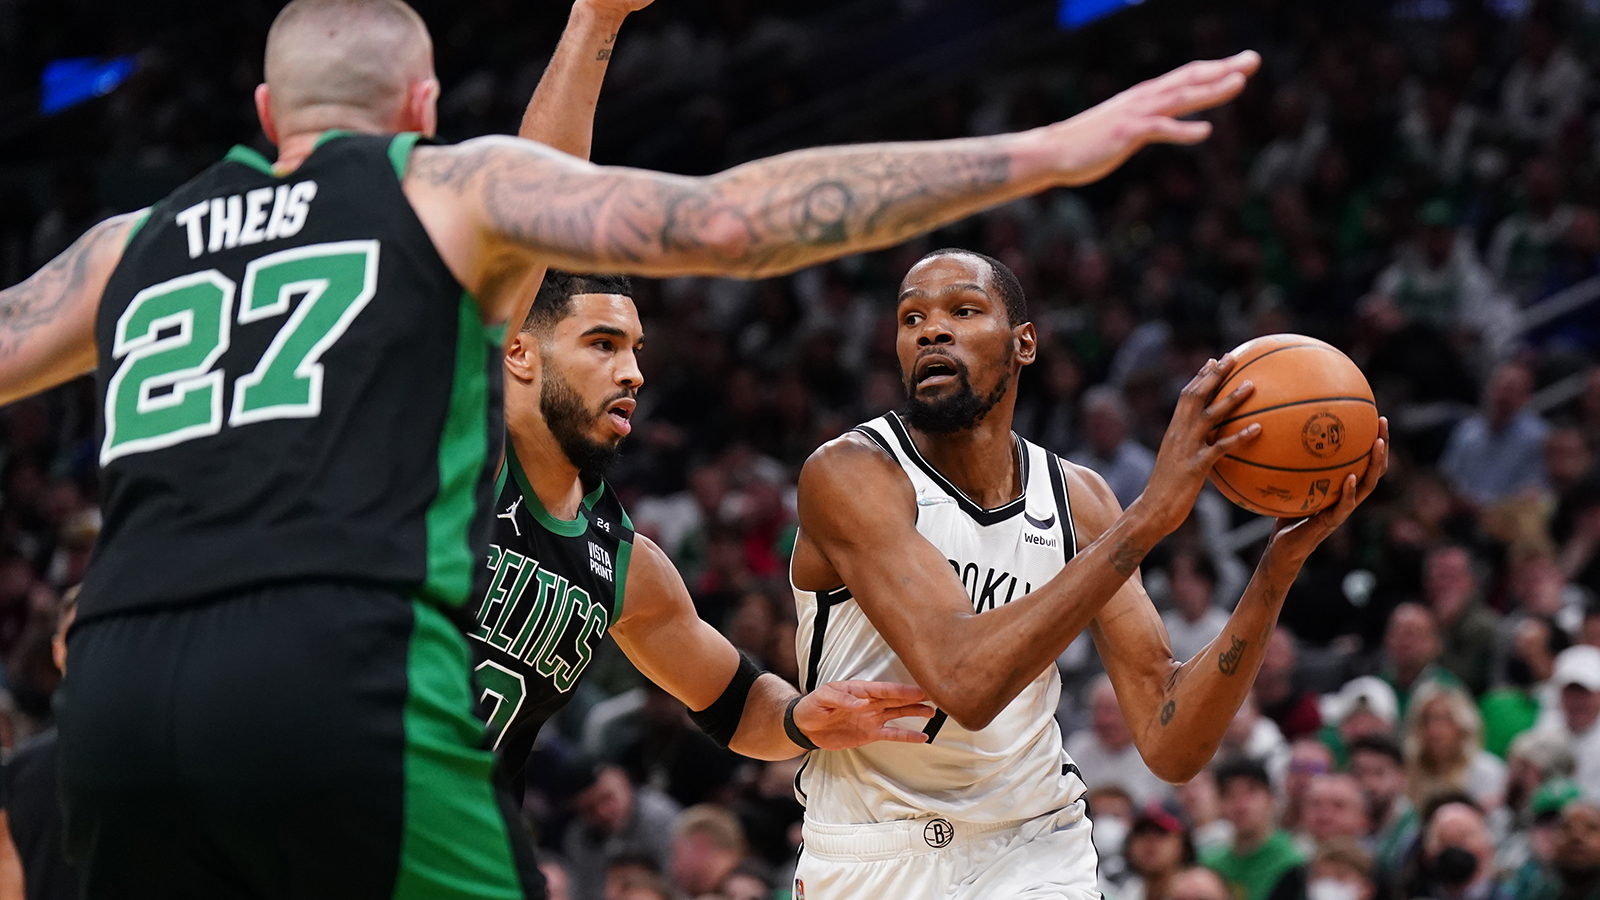 Boston Celtics are making it difficult for Nets’ Kevin Durant